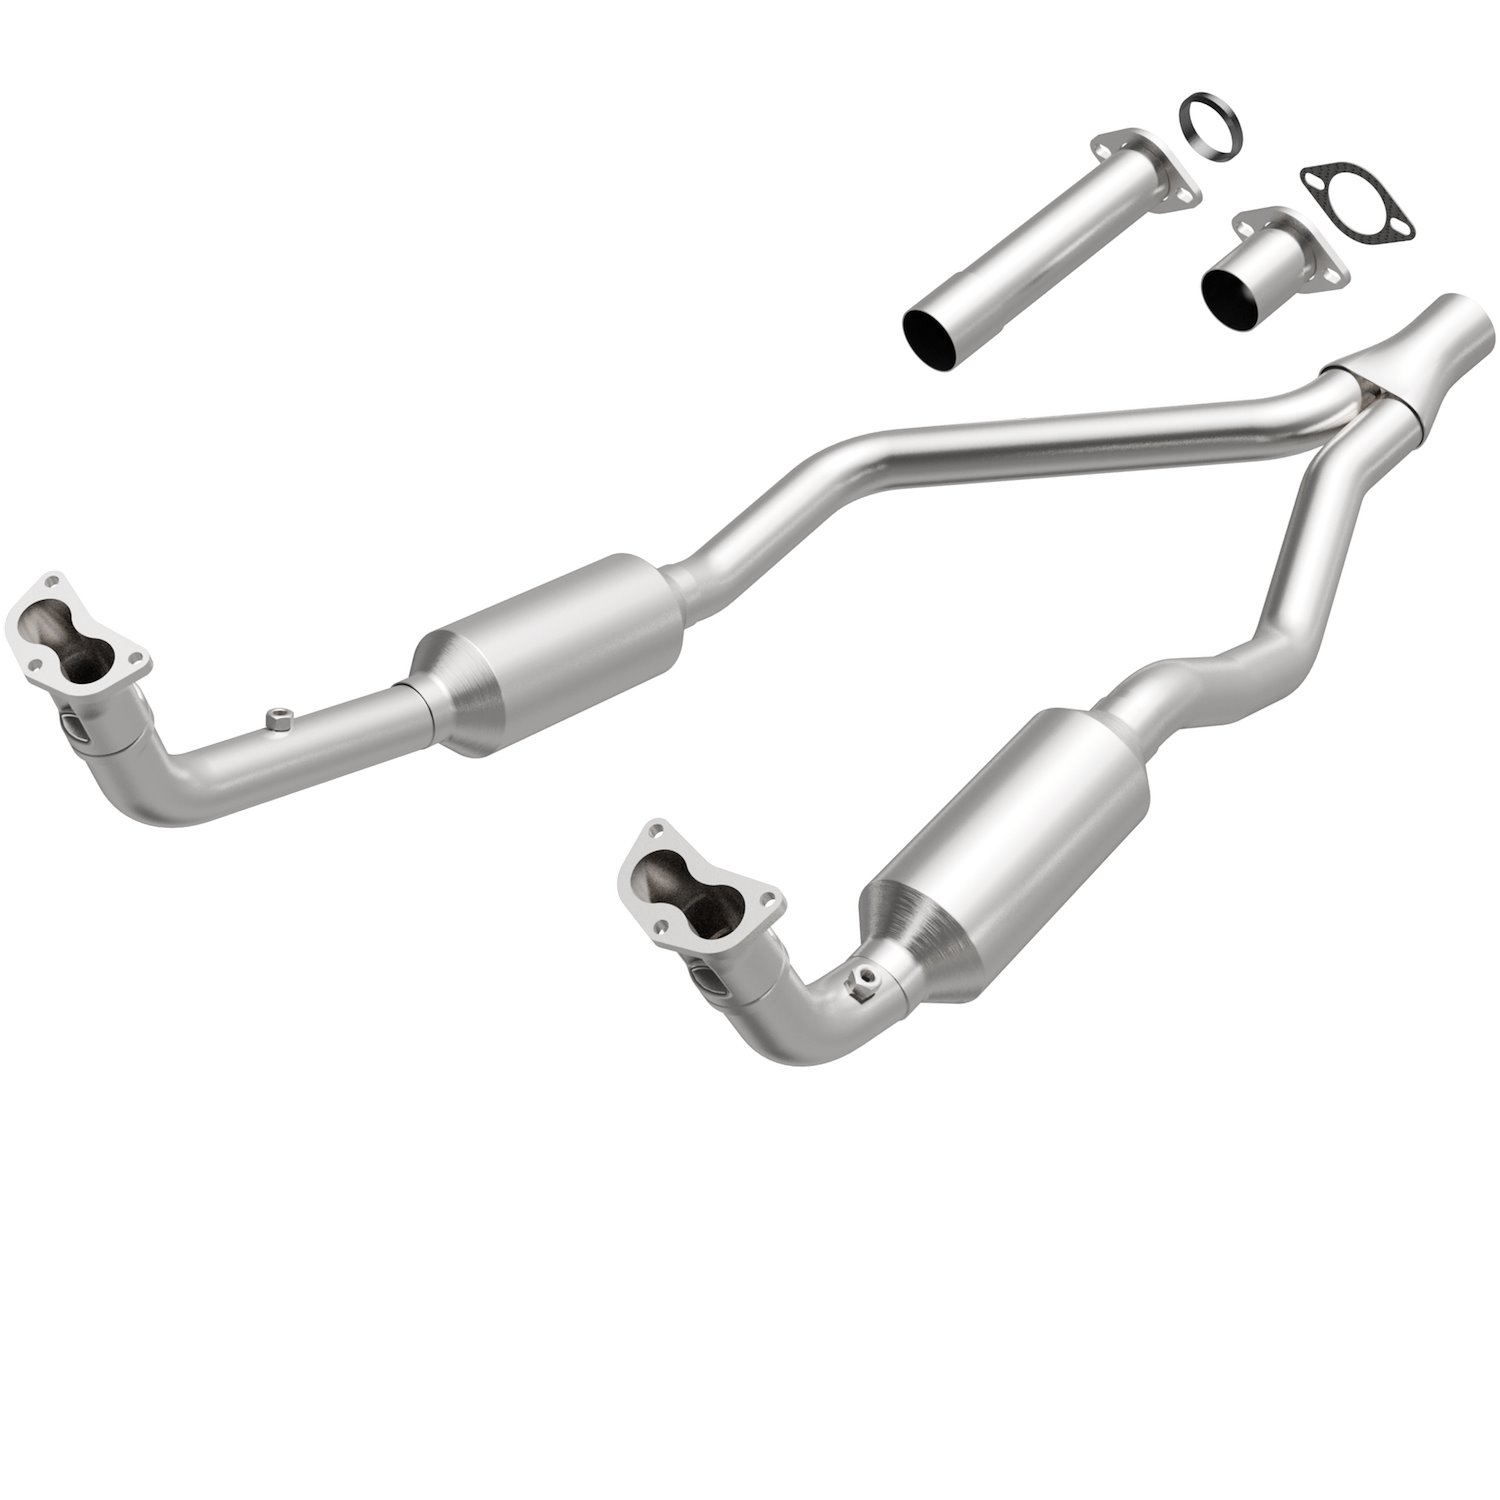 1990-1993 Land Rover Range Rover California Grade CARB Compliant Direct-Fit Catalytic Converter